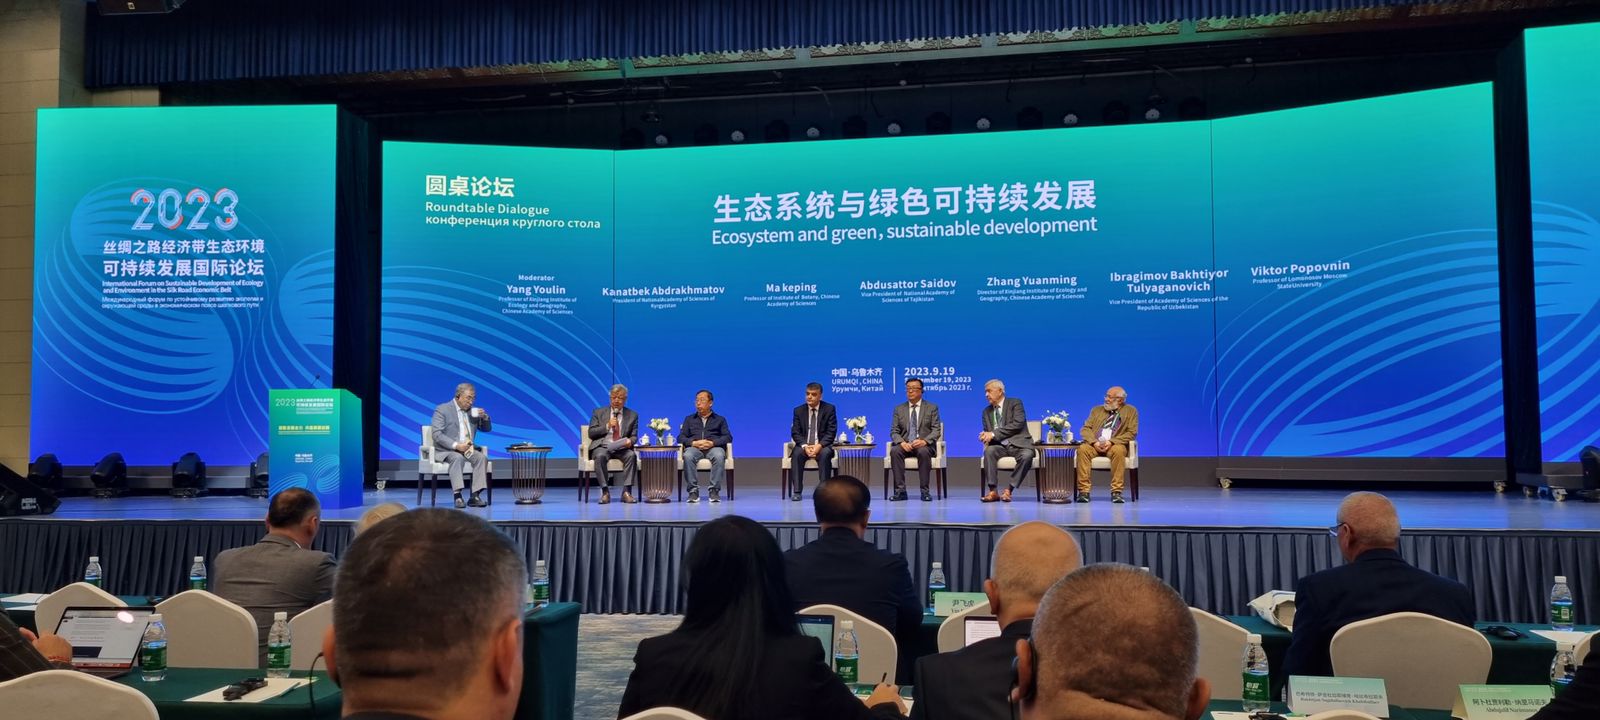 The delegation of Al-Farabi Kazakh National University visited the International Forum on sustainable development of ecology and the environment in the economic belt of the Silk Road in China